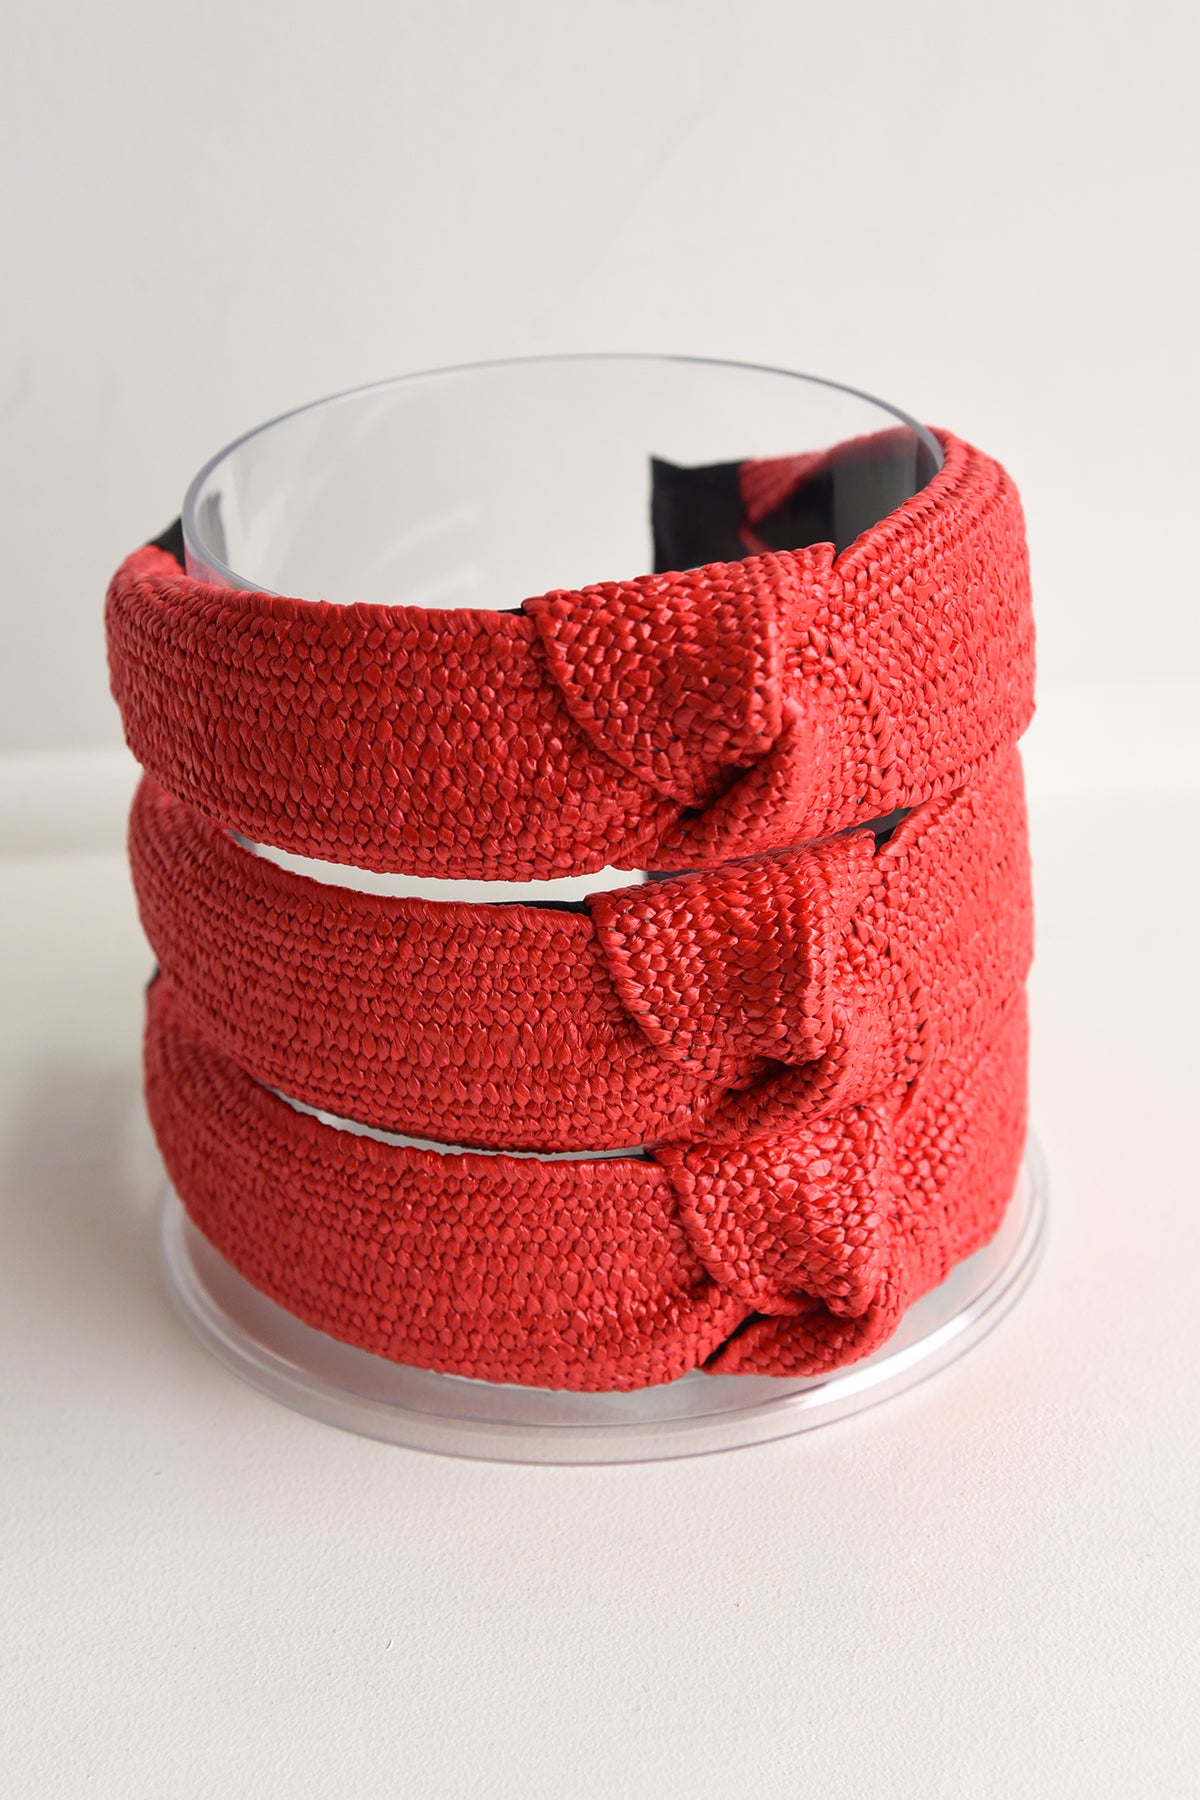 RED KNOTTED HEADBAND